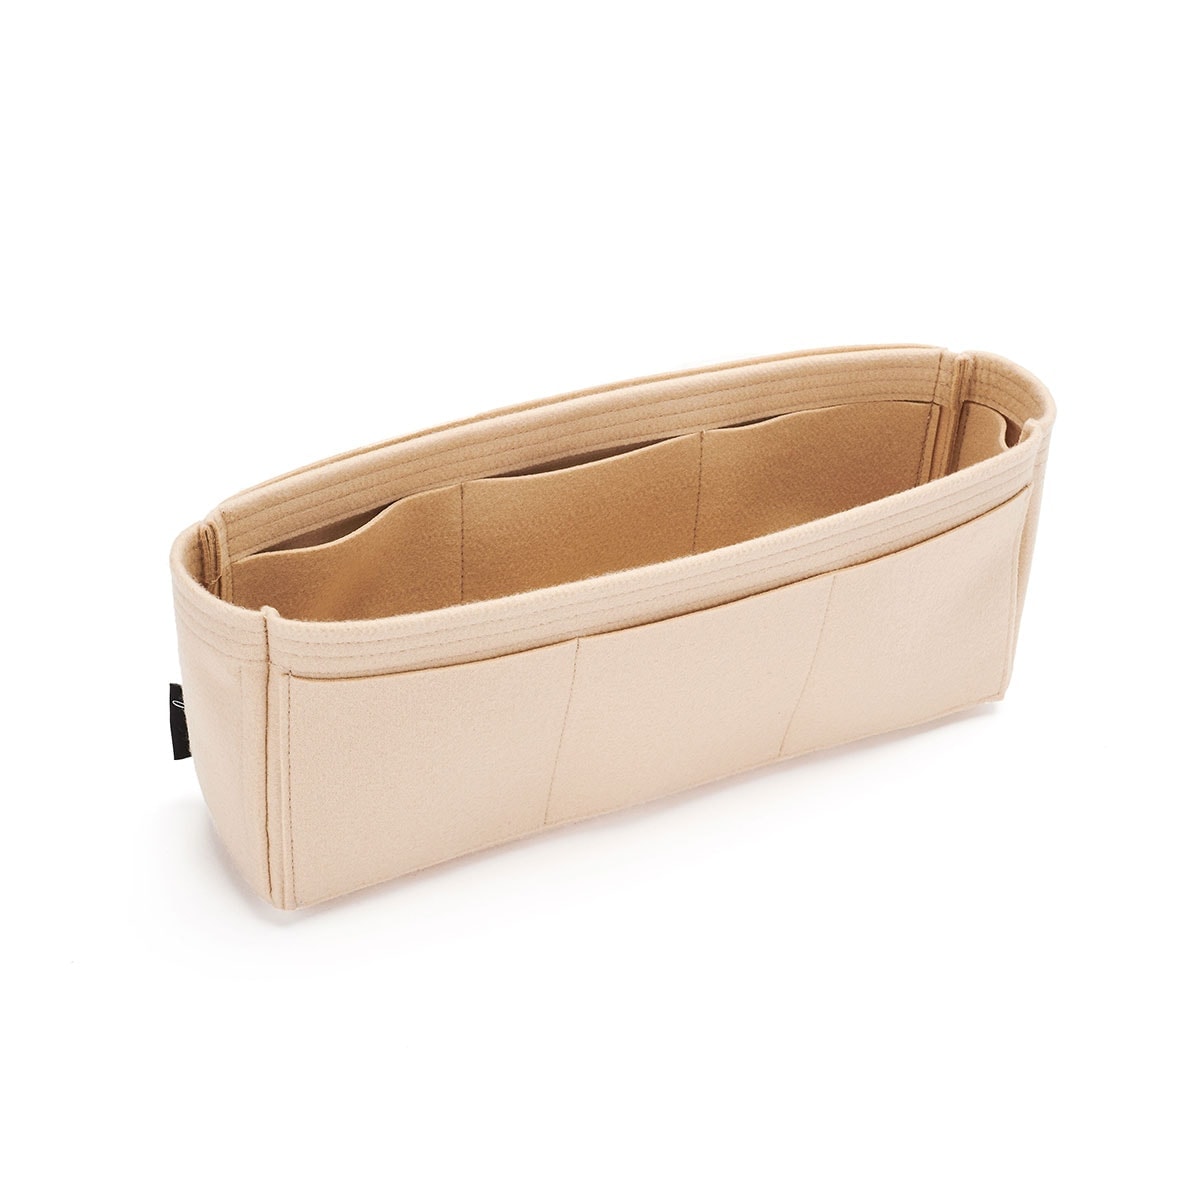 Pouch Inner Bag Tote Bag Organizer Insert Bag With Zipper For Tote